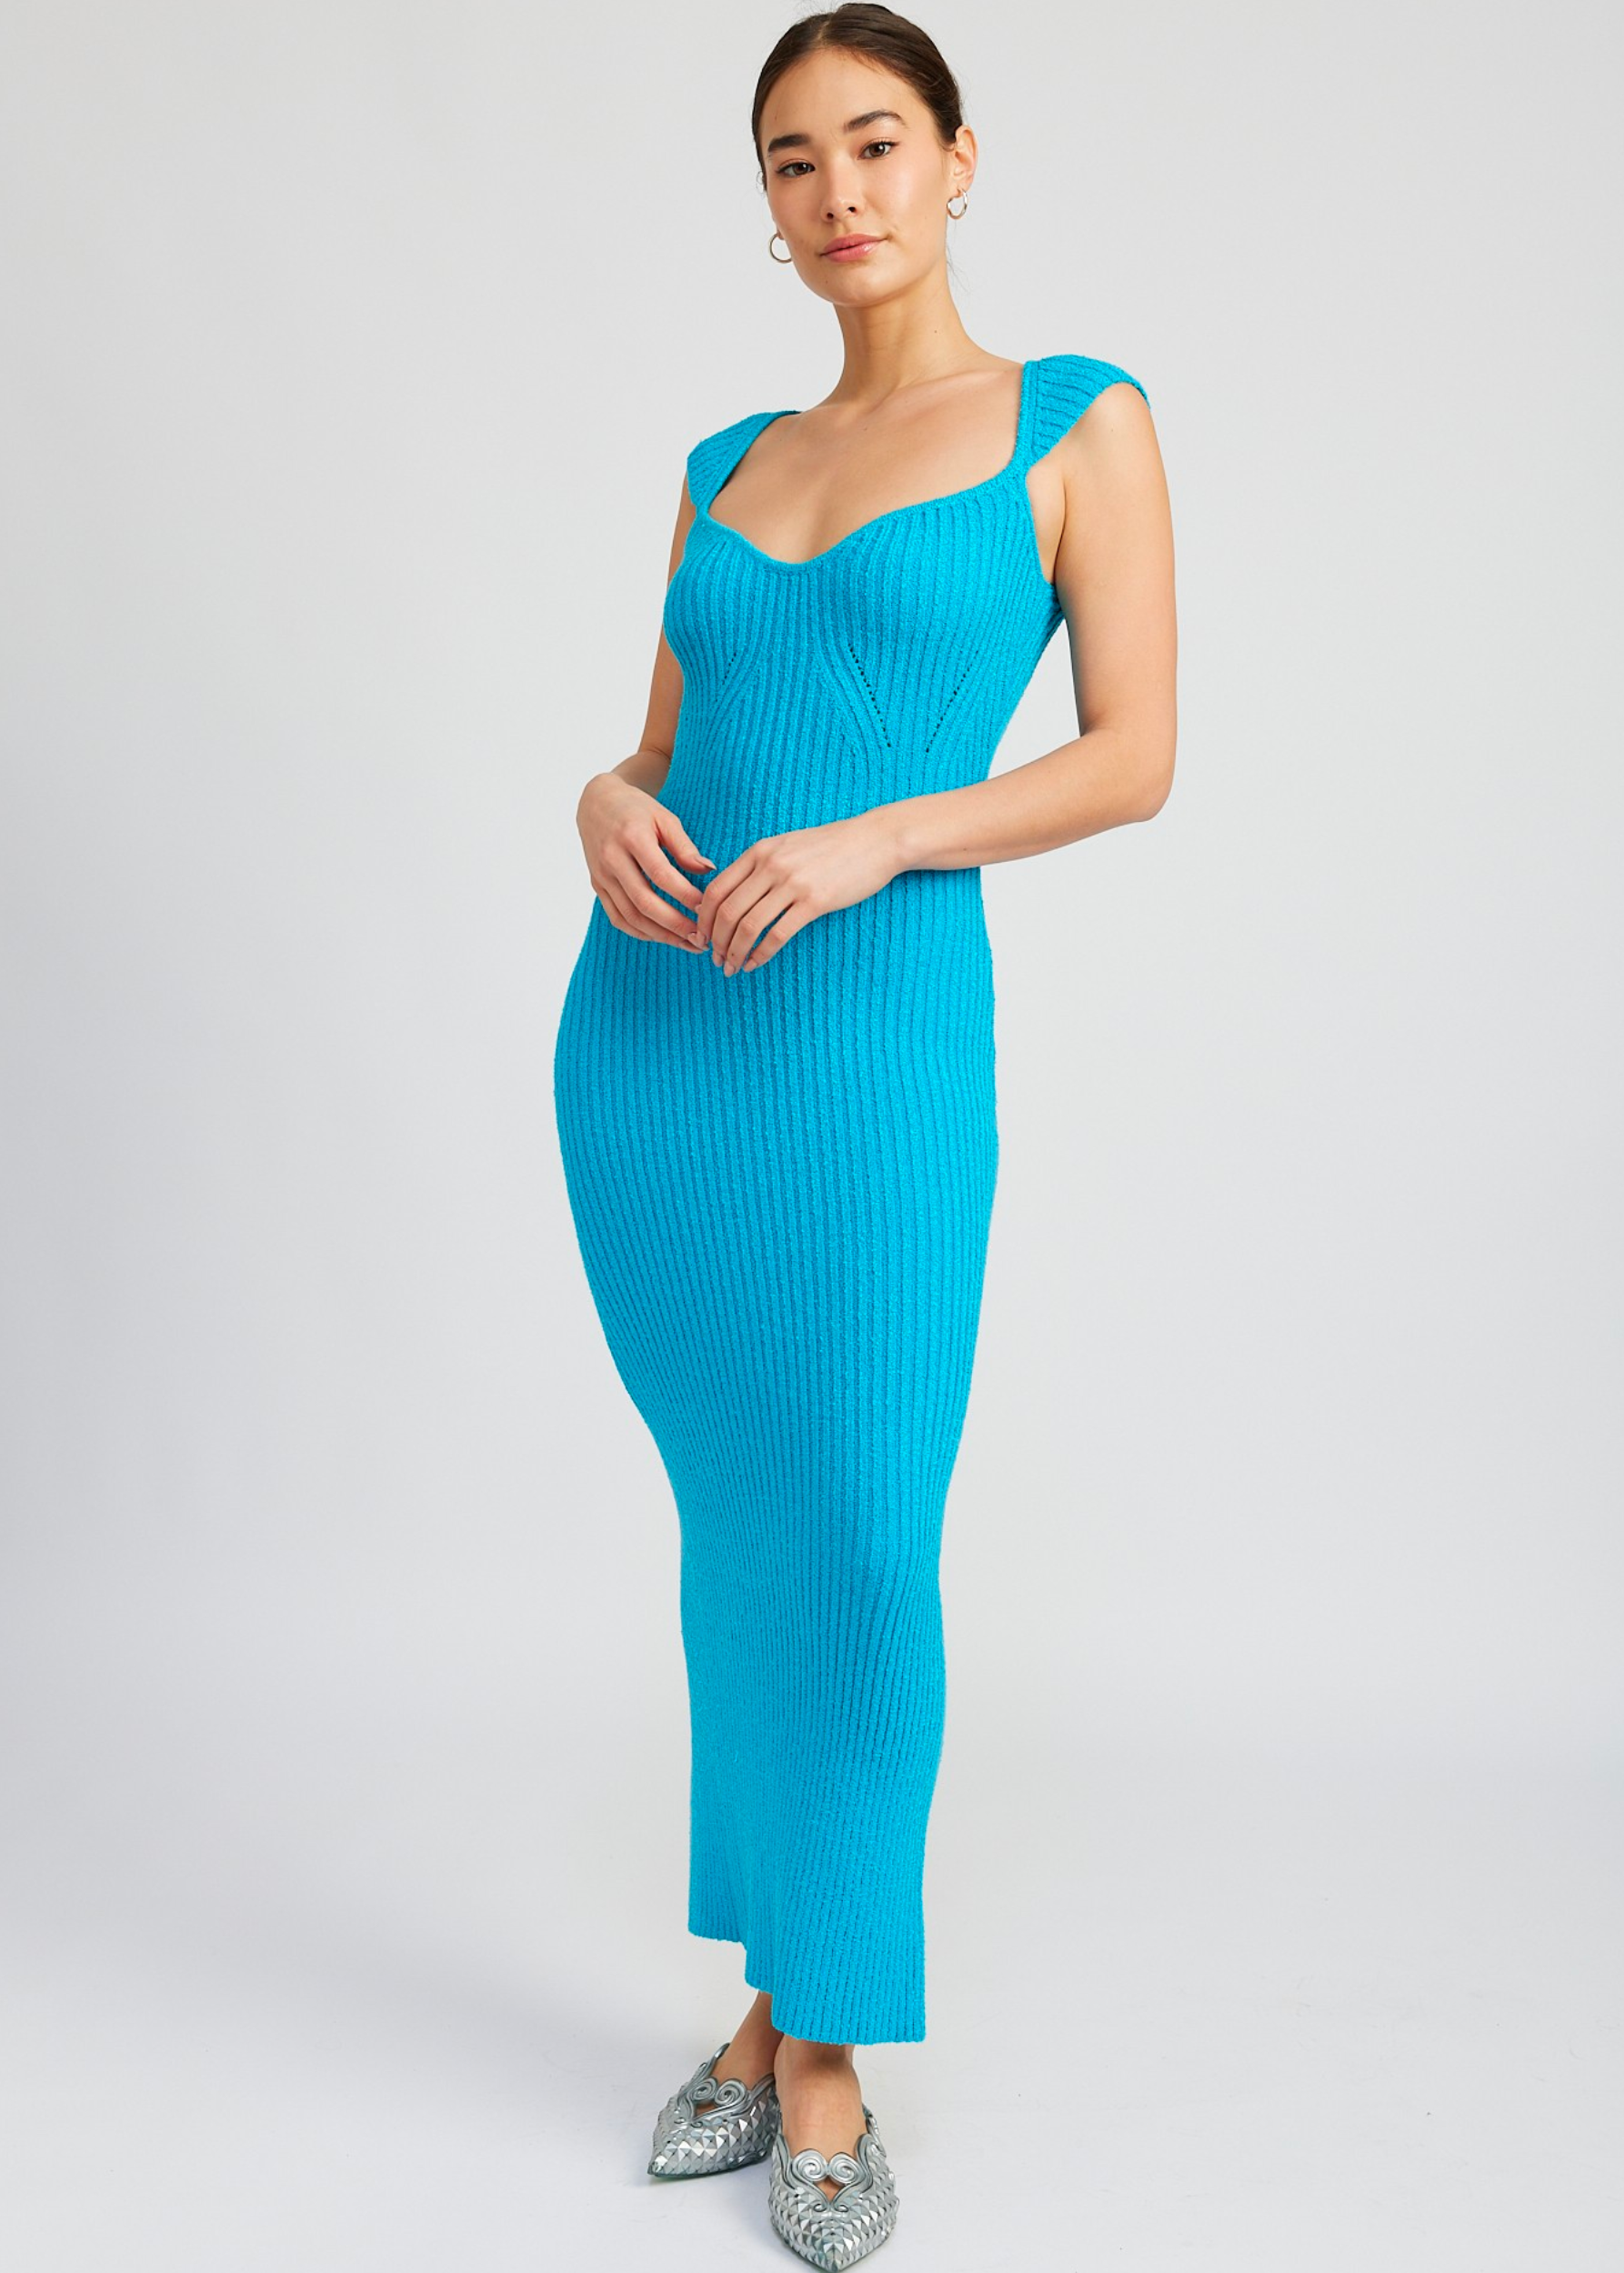 Sweetheart Bodycon Dress With Slit